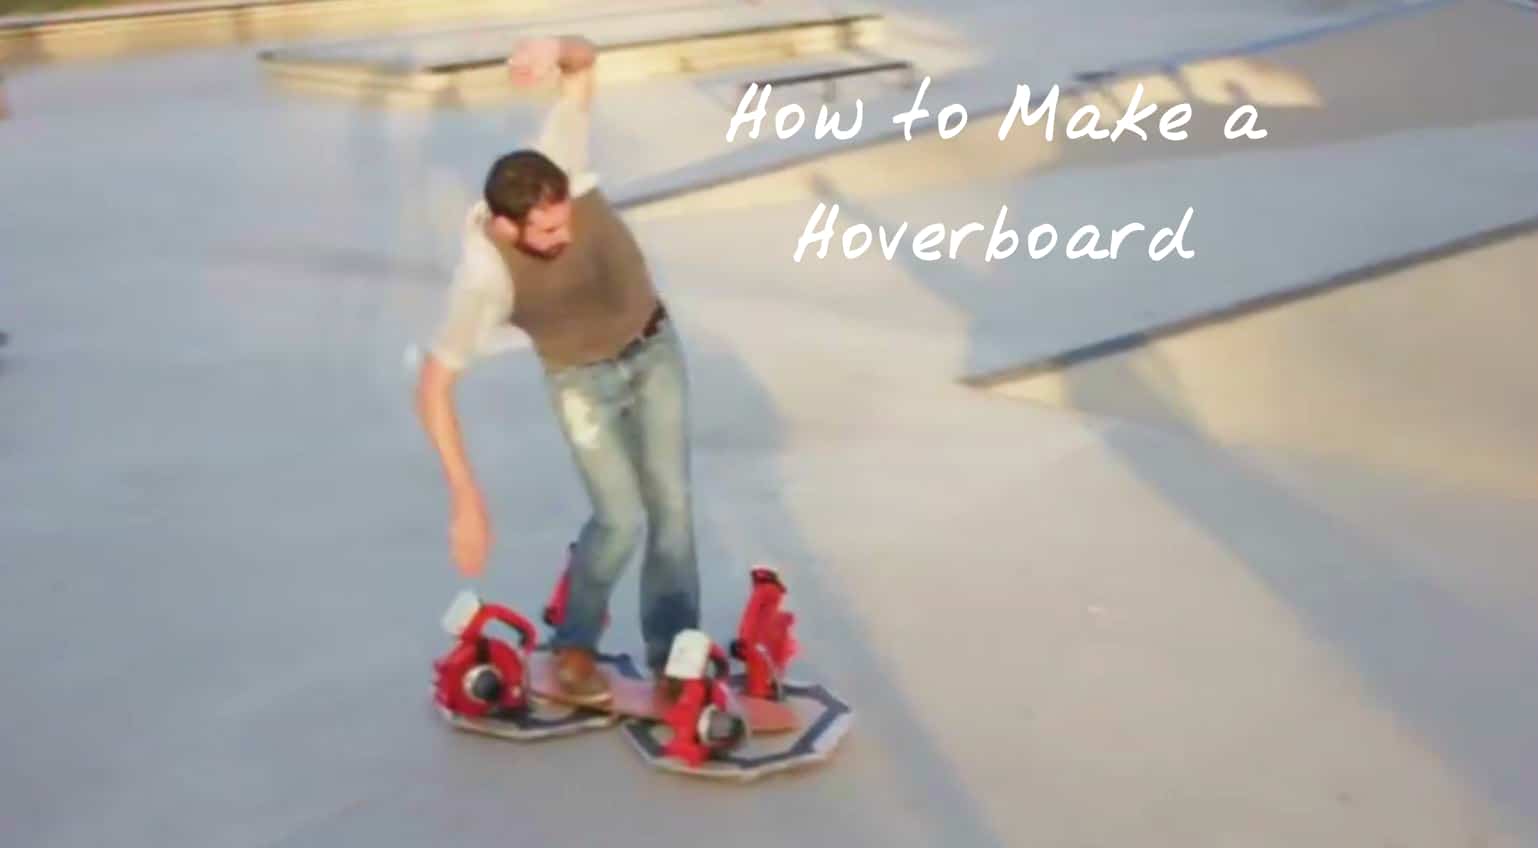 How to make a hoverboard - DIY Hoverboard with Leaf Blower1538 x 848